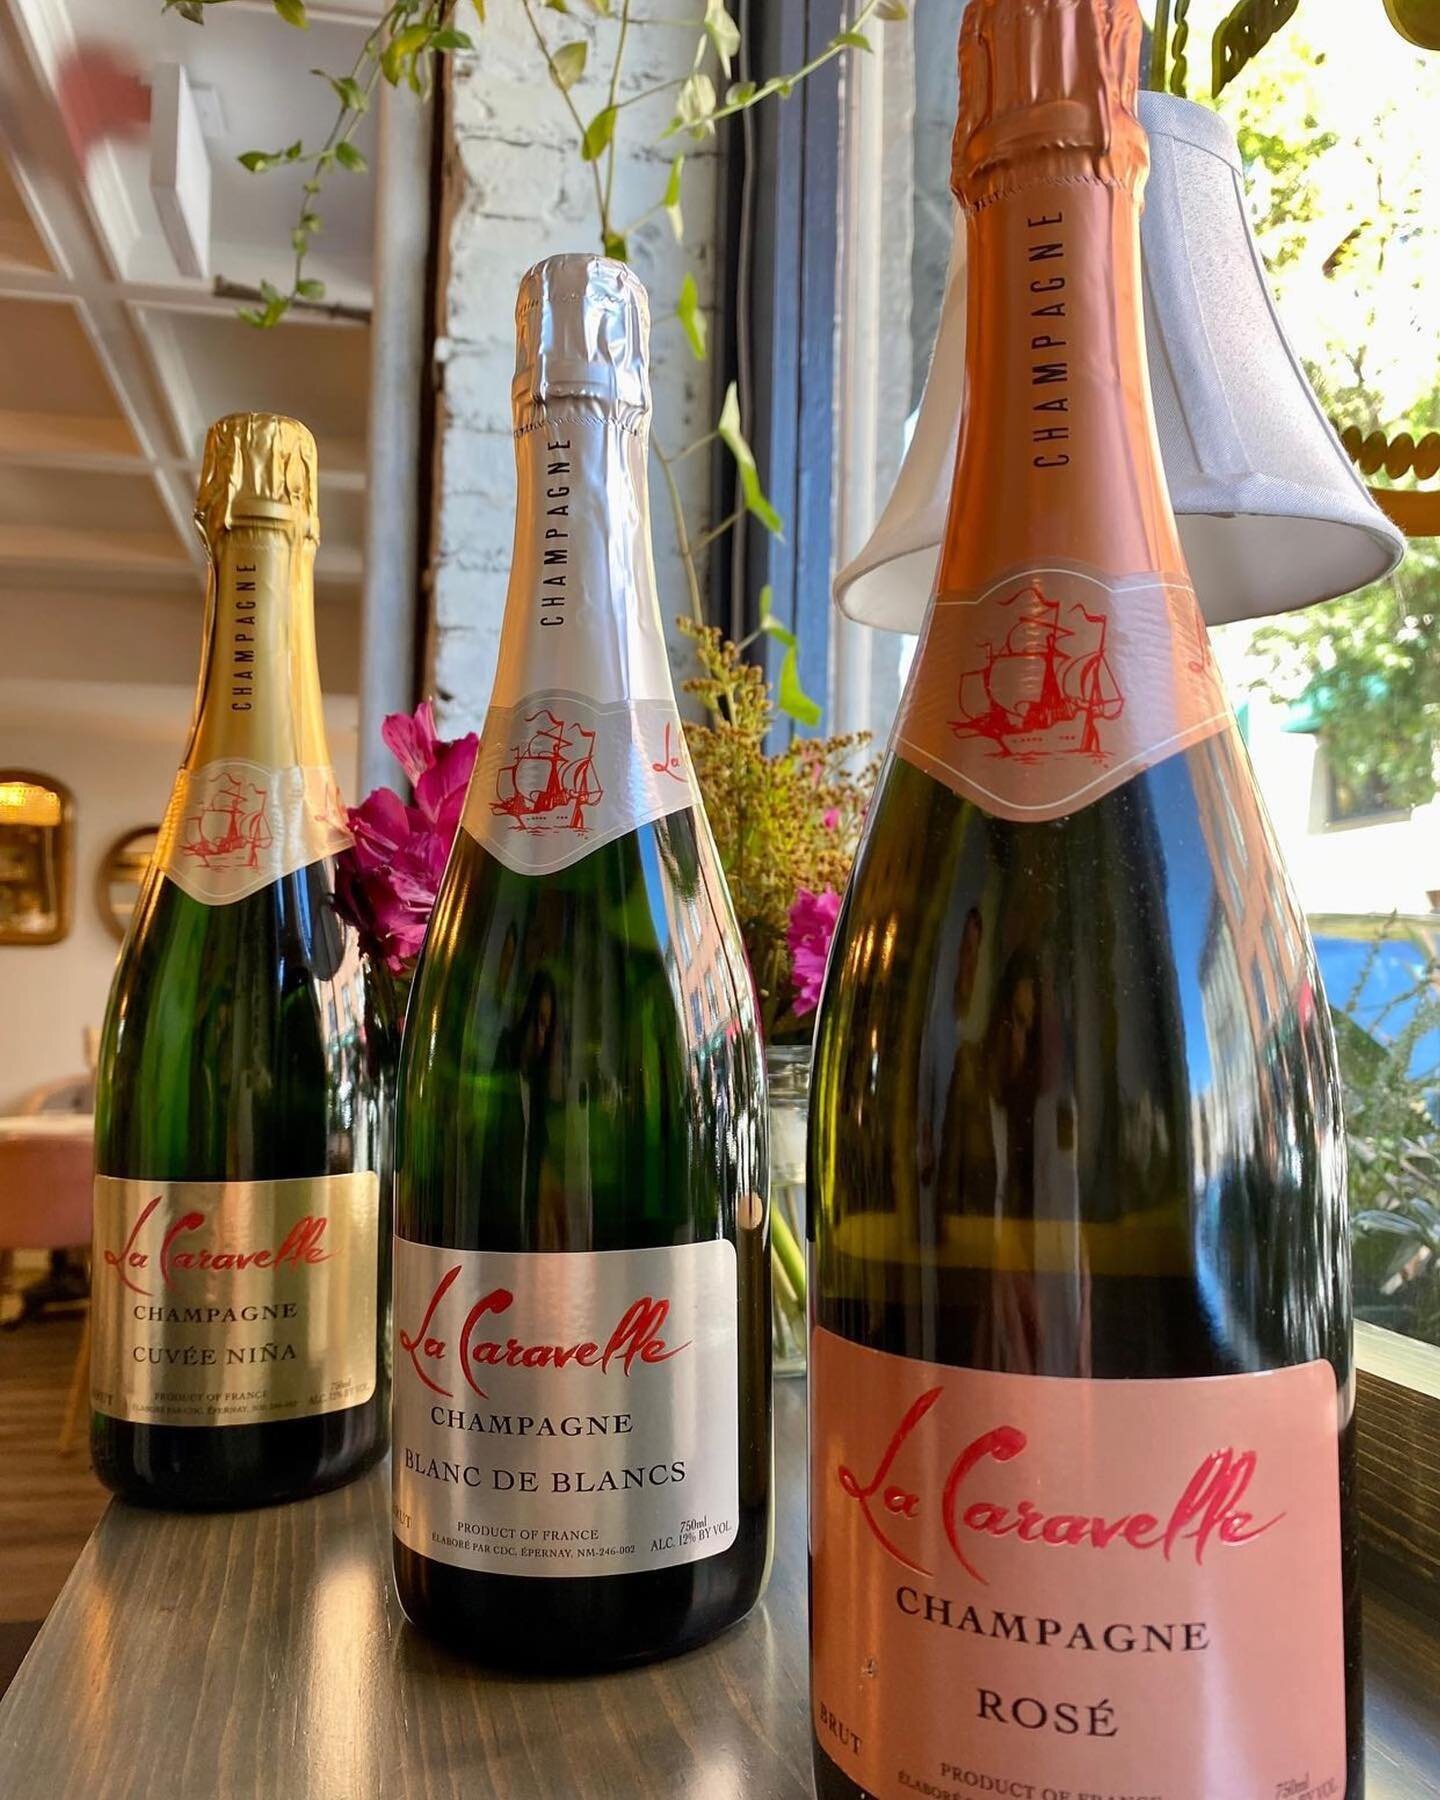 Exciting! Our line of @lacaravellechampagne has landed at the new cool @bocagechampagnebar in Saratoga Springs, NY. Bubbly Cheers!
💫🍾🤩🎊

#Repost @bocagechampagnebar
・・・
🚨NEW ARRIVAL🚨

We are thrilled to feature @lacaravellechampagne on our menu